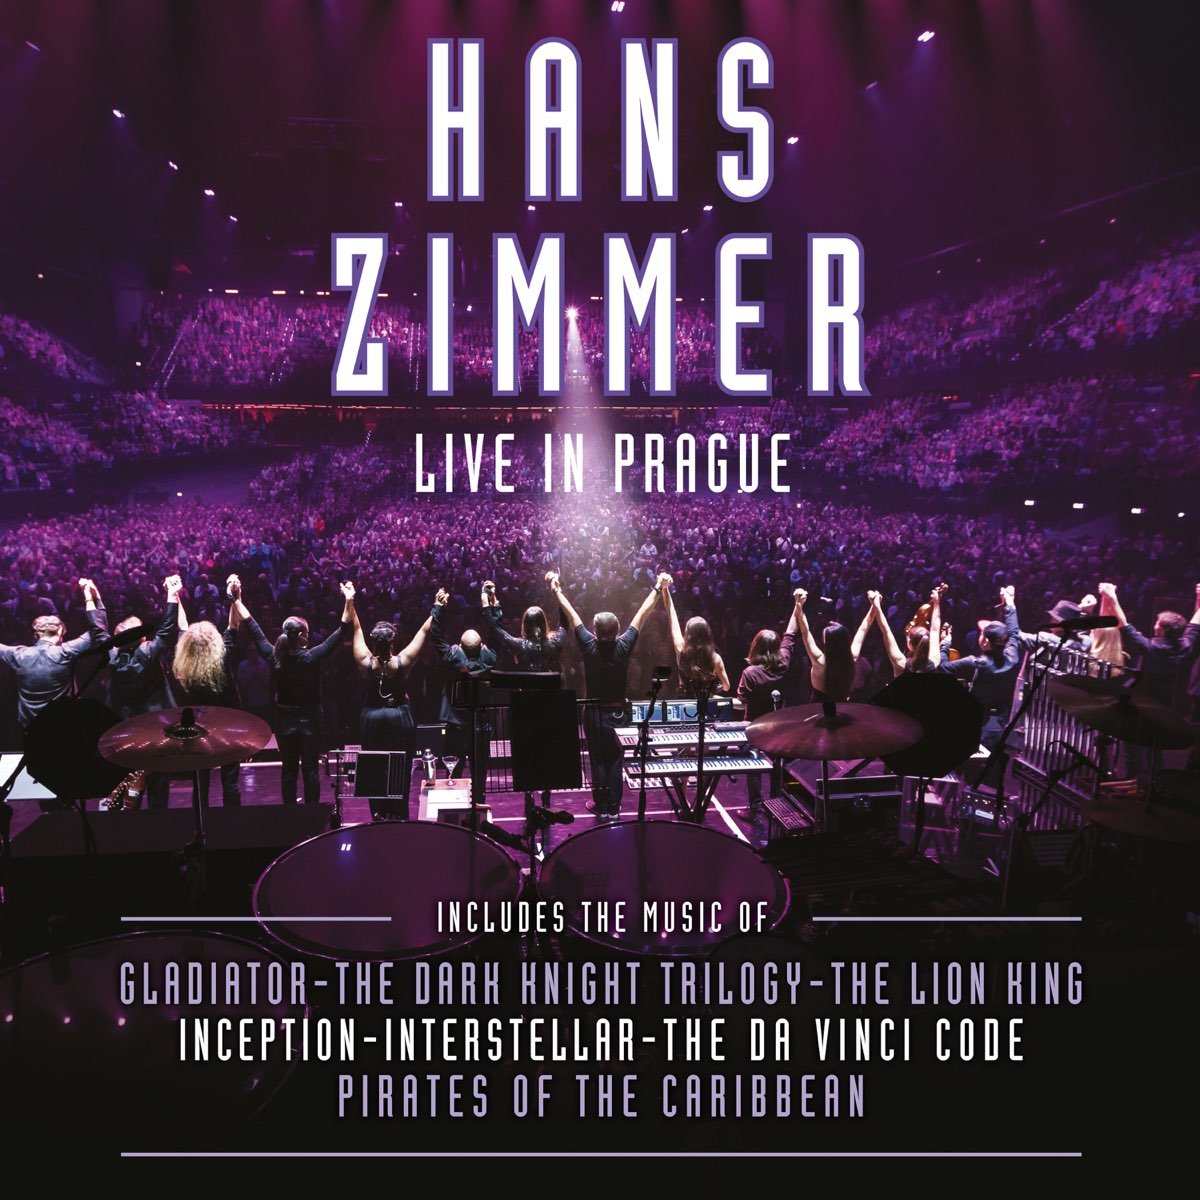 Live in Prague by Hans Zimmer on Apple Music